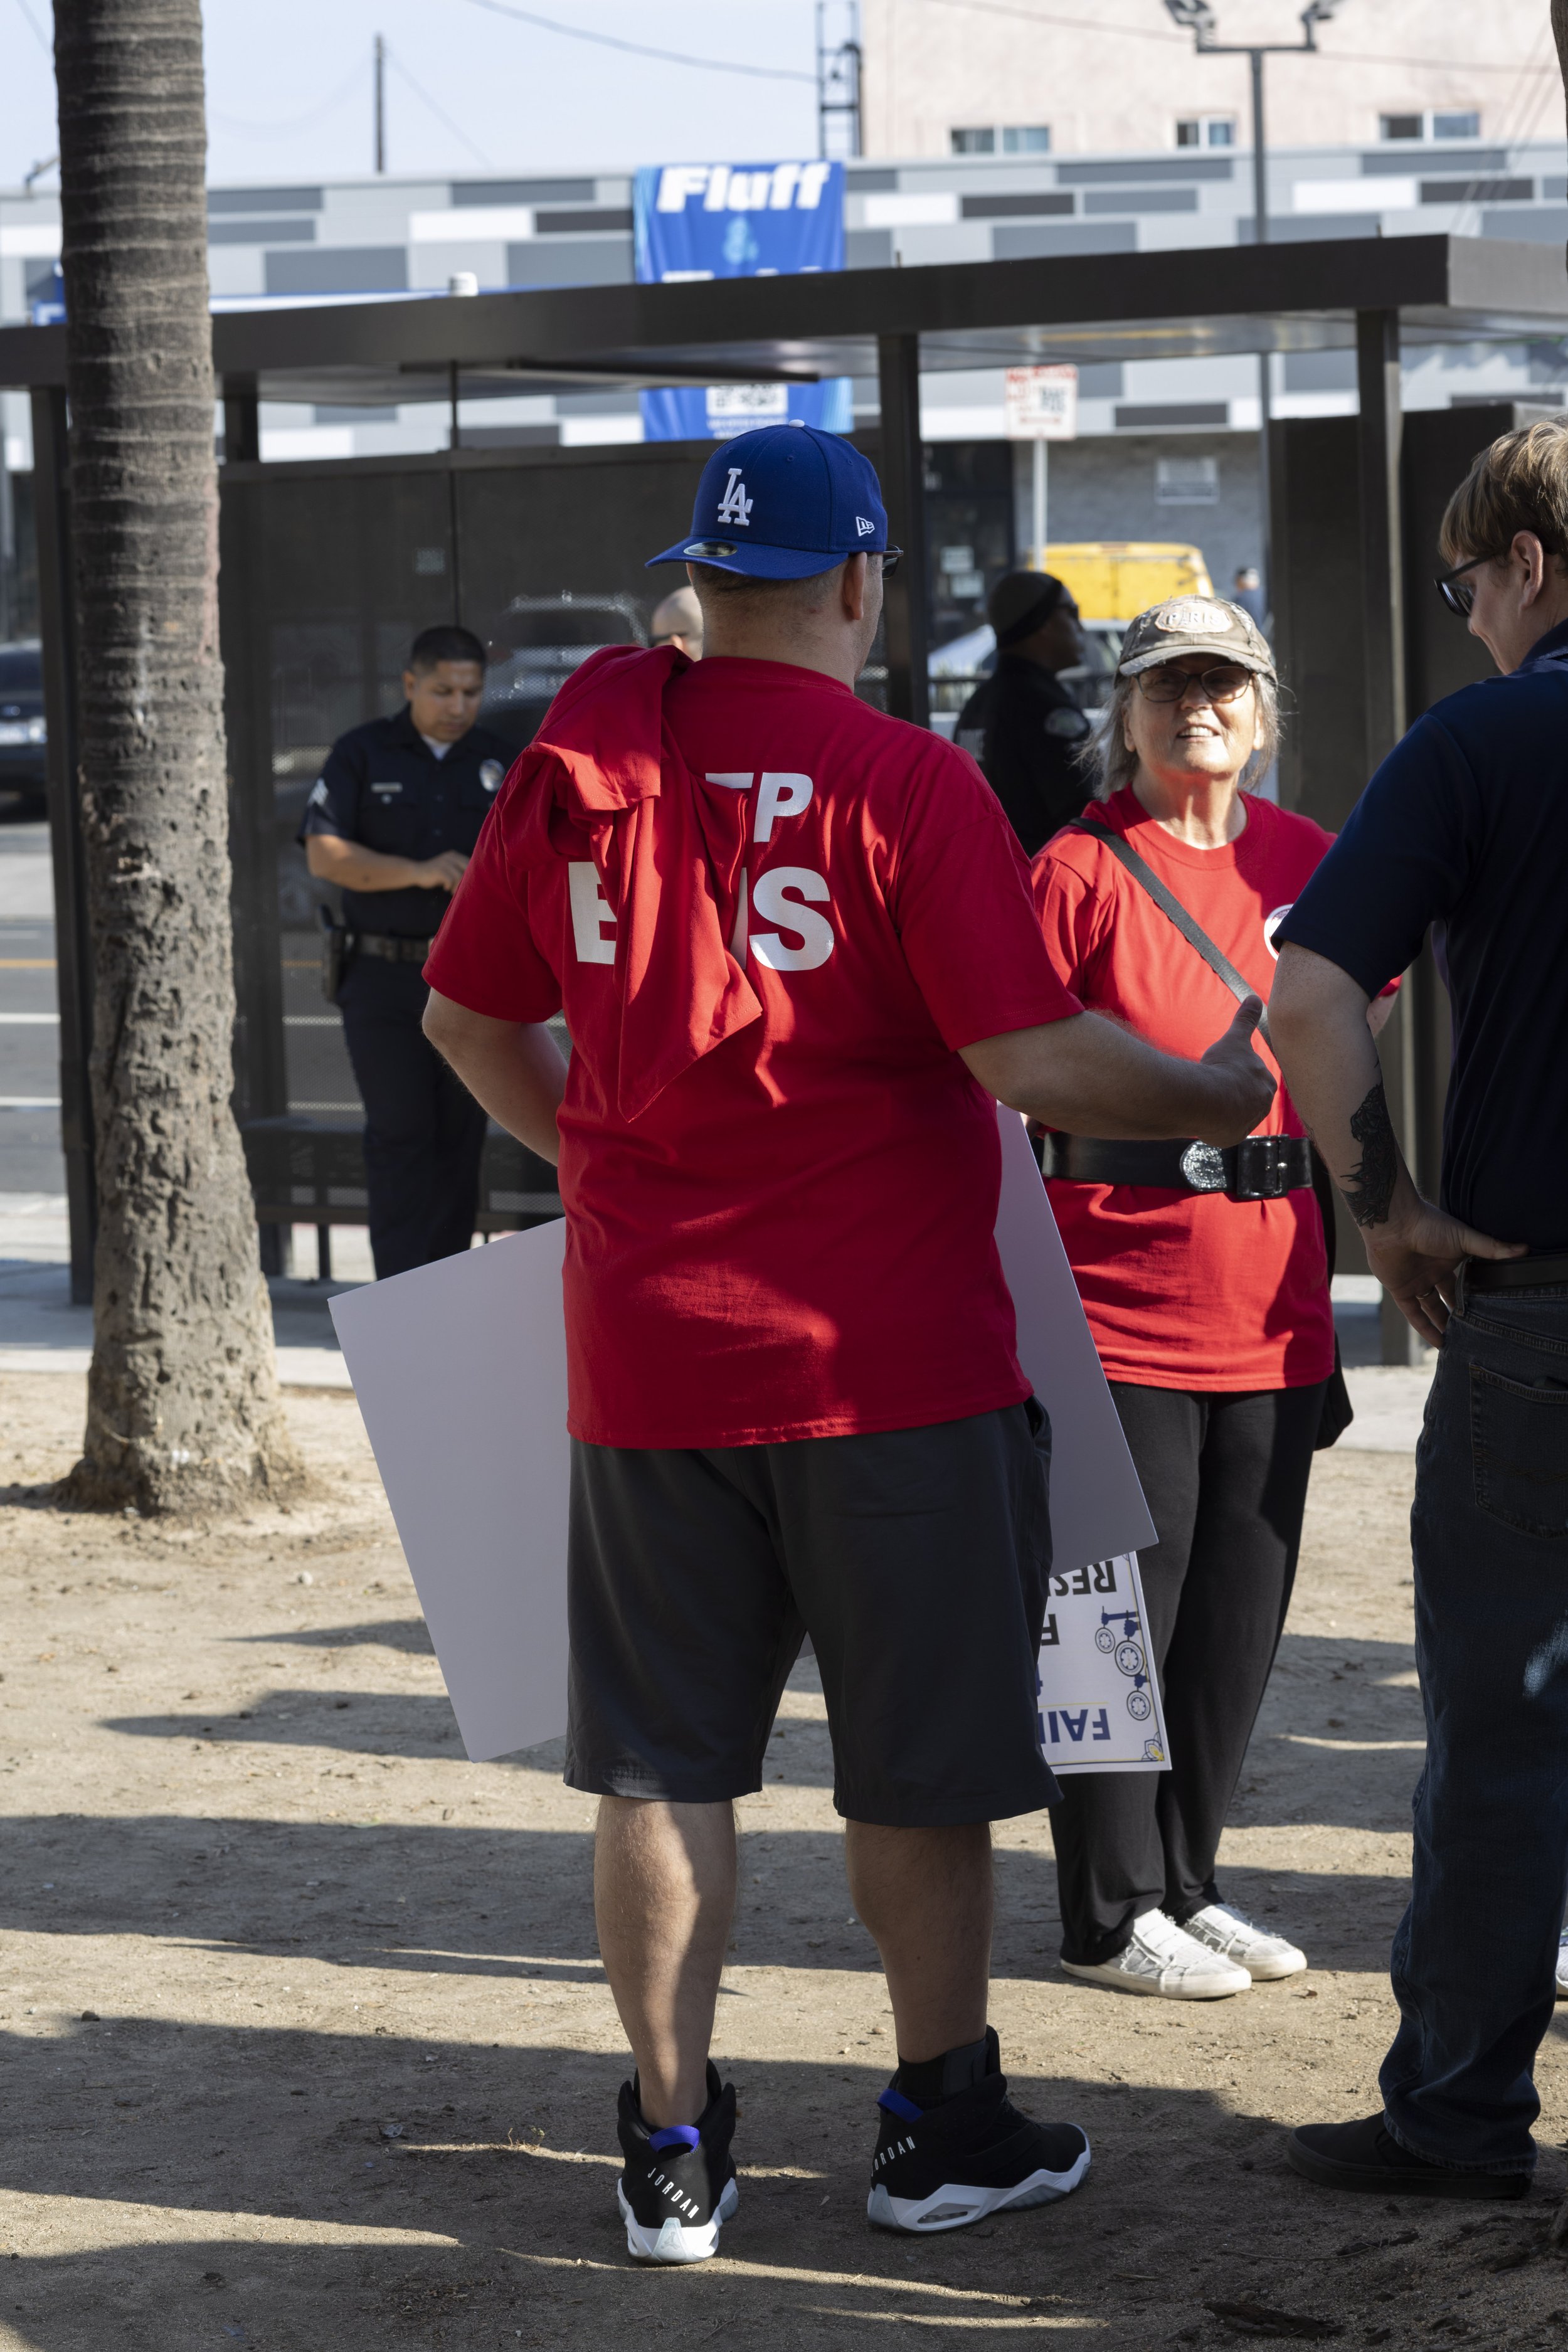  Katherine Shage, middle, who helped organize the march for fair wages for EMS workers, speaking with everyone before heading out on the march over the sixth street bridge into downtown Los Angeles. East Los Angeles, Calif. September 13, 2022. (Jamie